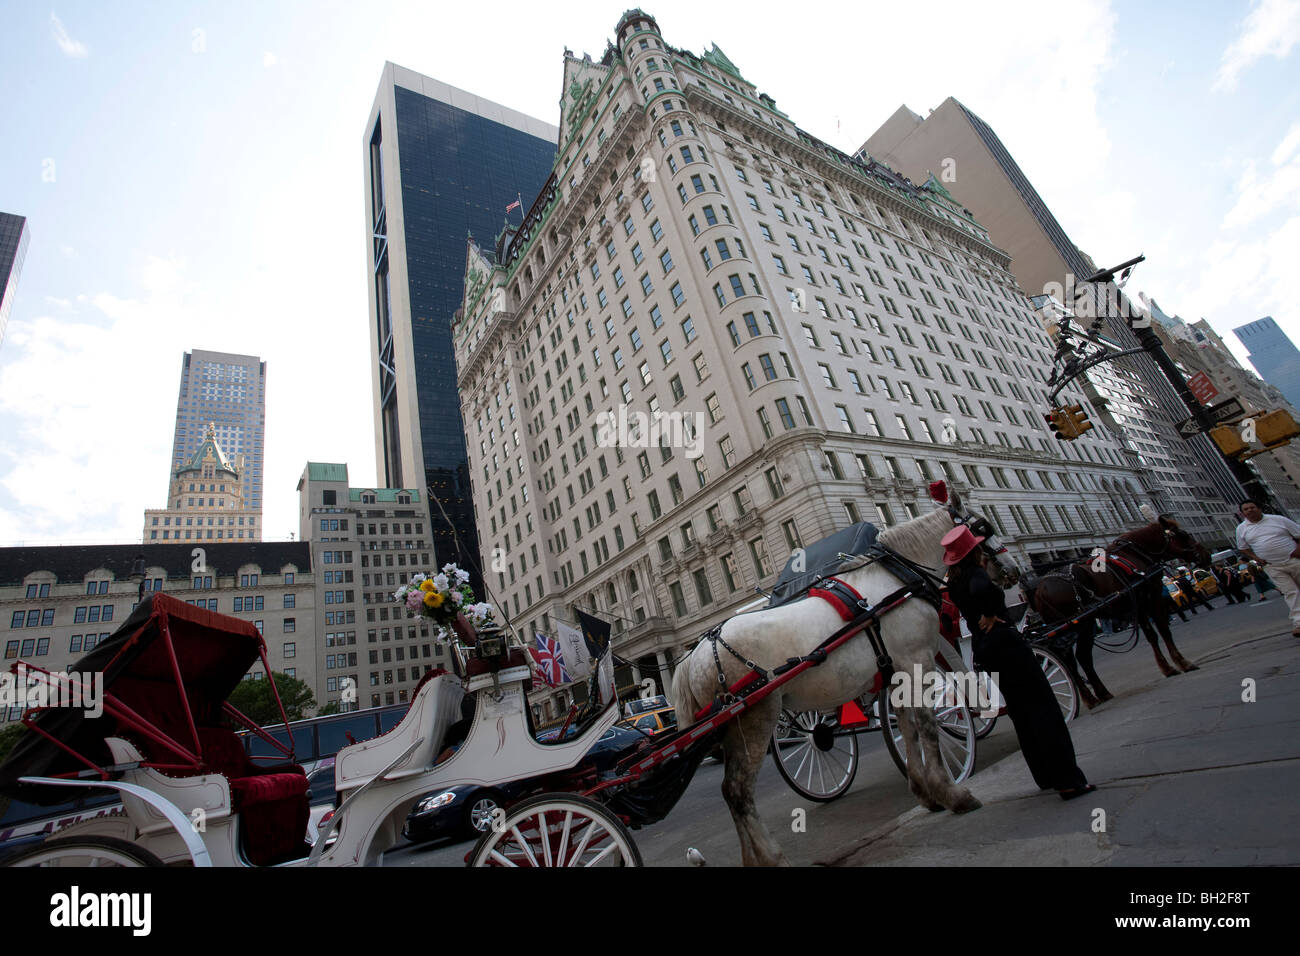 The Plaza Hotel as seen from the corner of 5th Avenue and 59th Street in Manhattan Stock Photo